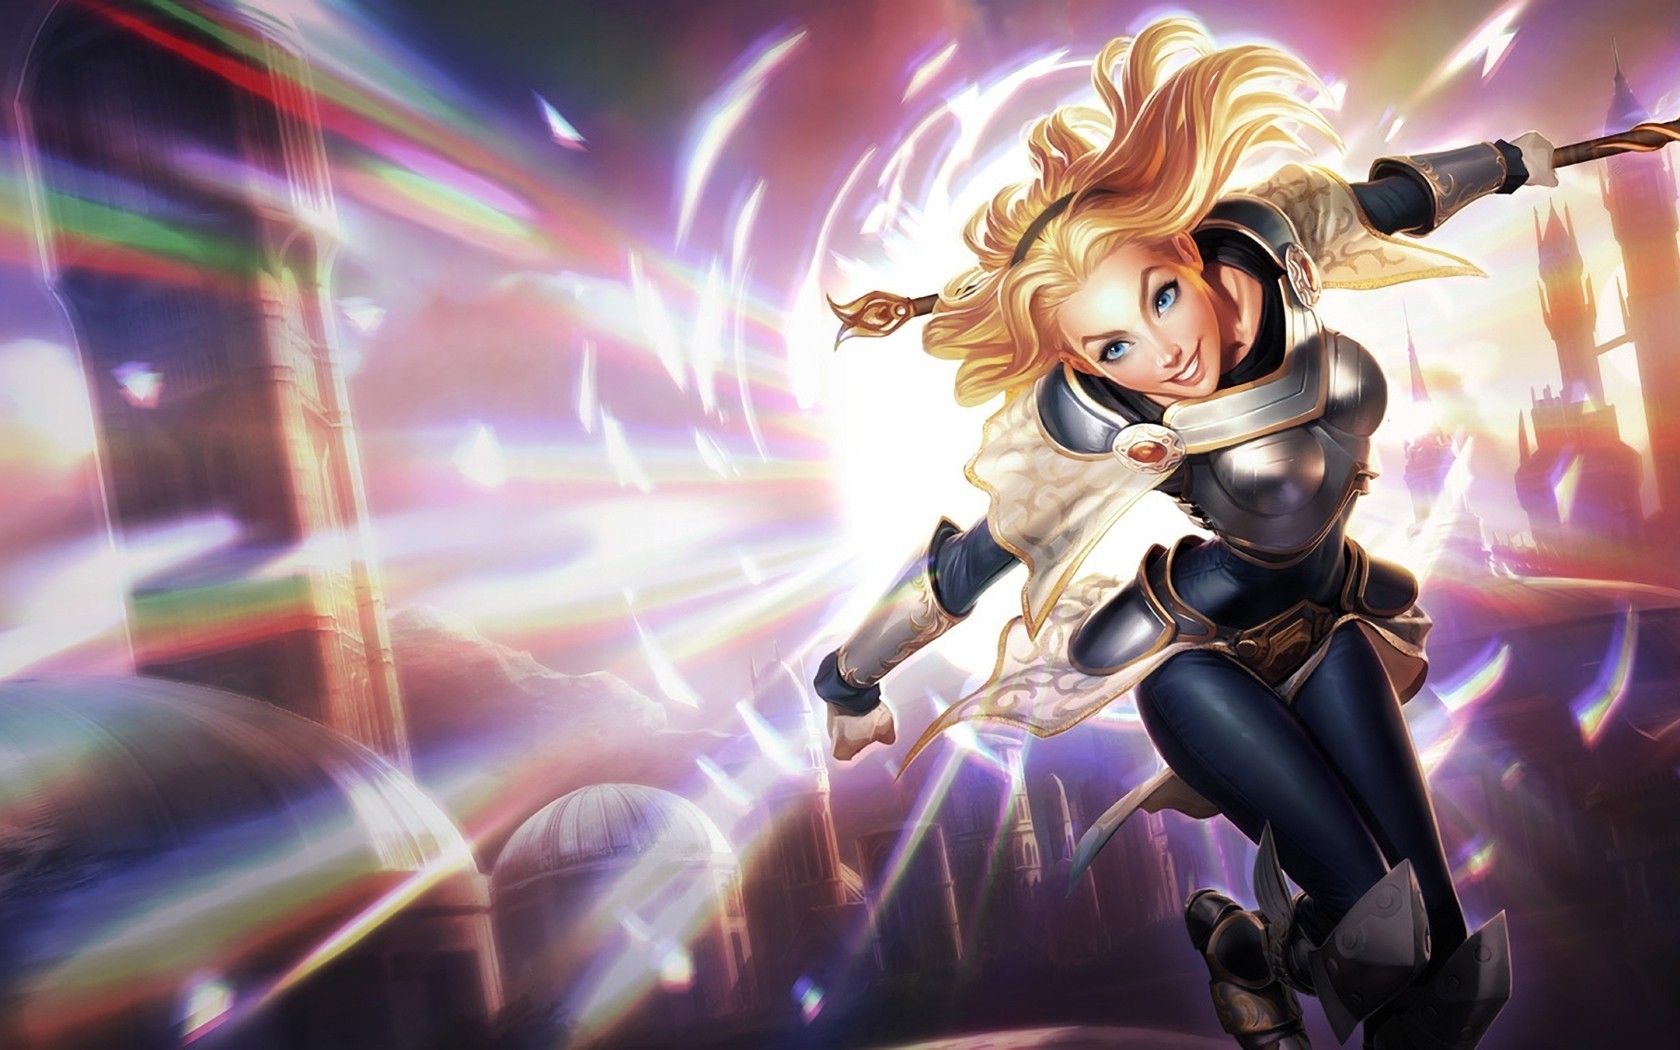 General 1680x1050 League of Legends Lux (League of Legends) video games video game girls blonde aqua eyes boobs smiling PC gaming